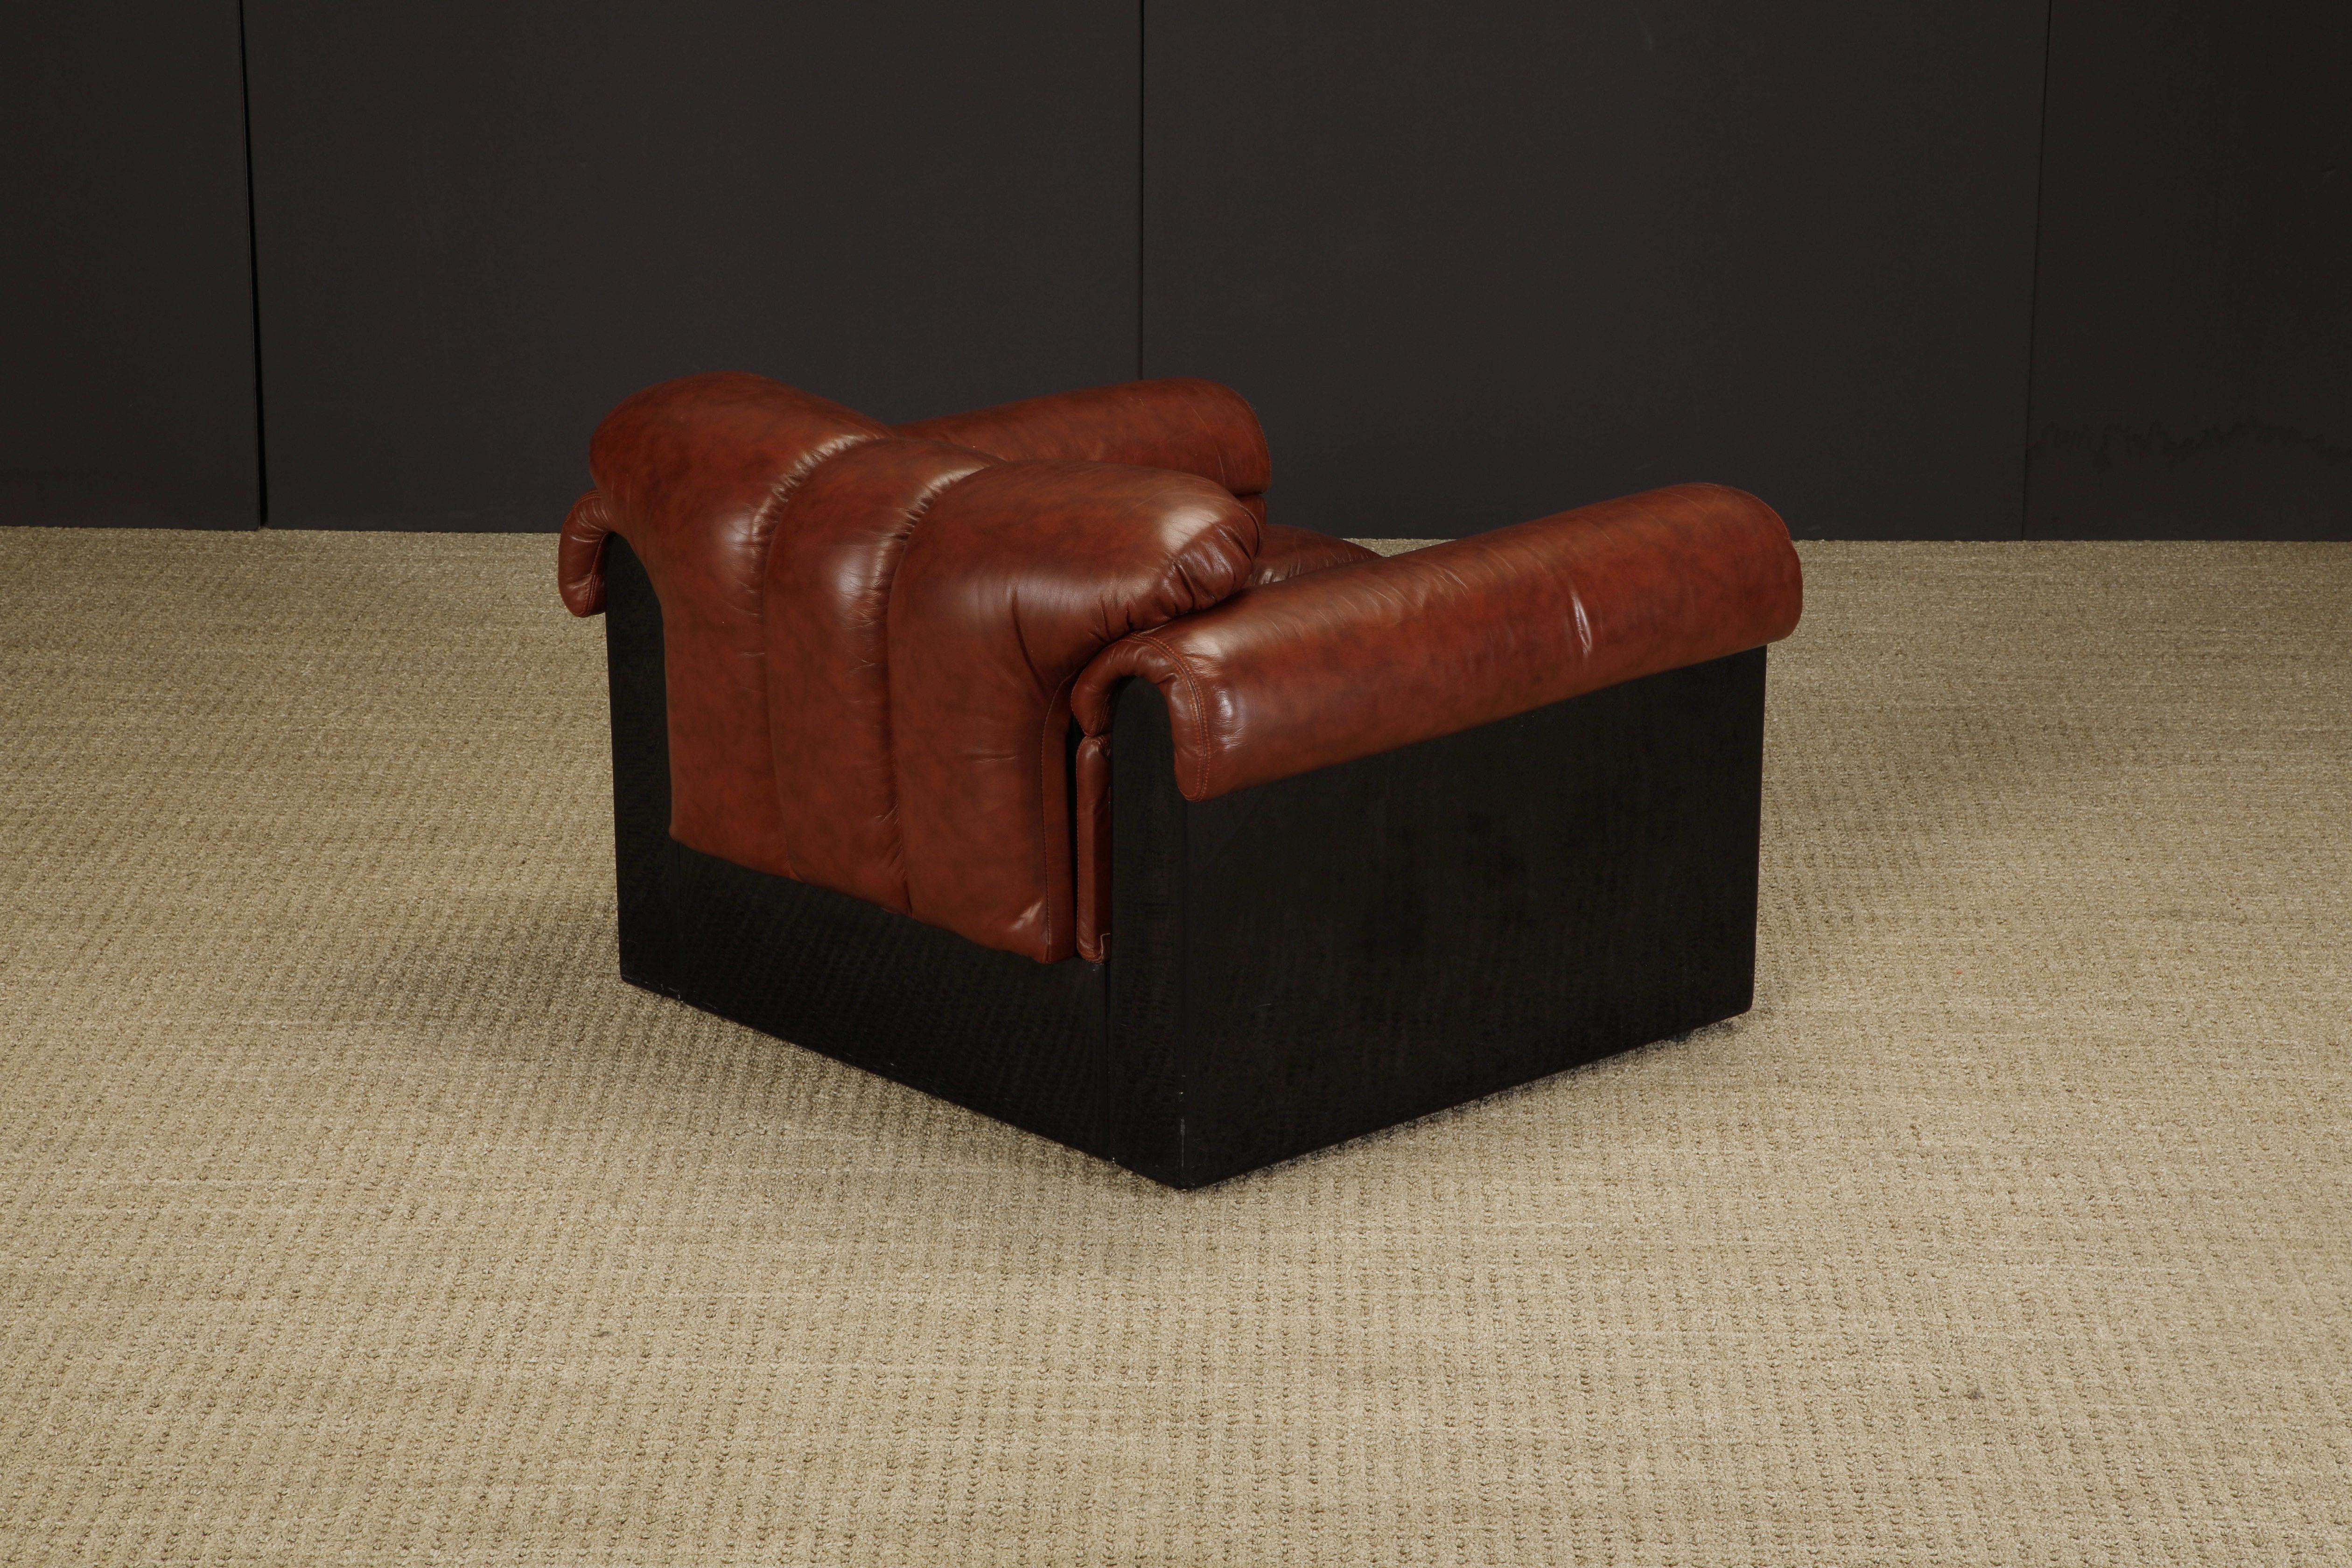 Lacquer 'Bounty' Leather Club Chair by L. Davanzati for The Pace Collection, 1980s For Sale